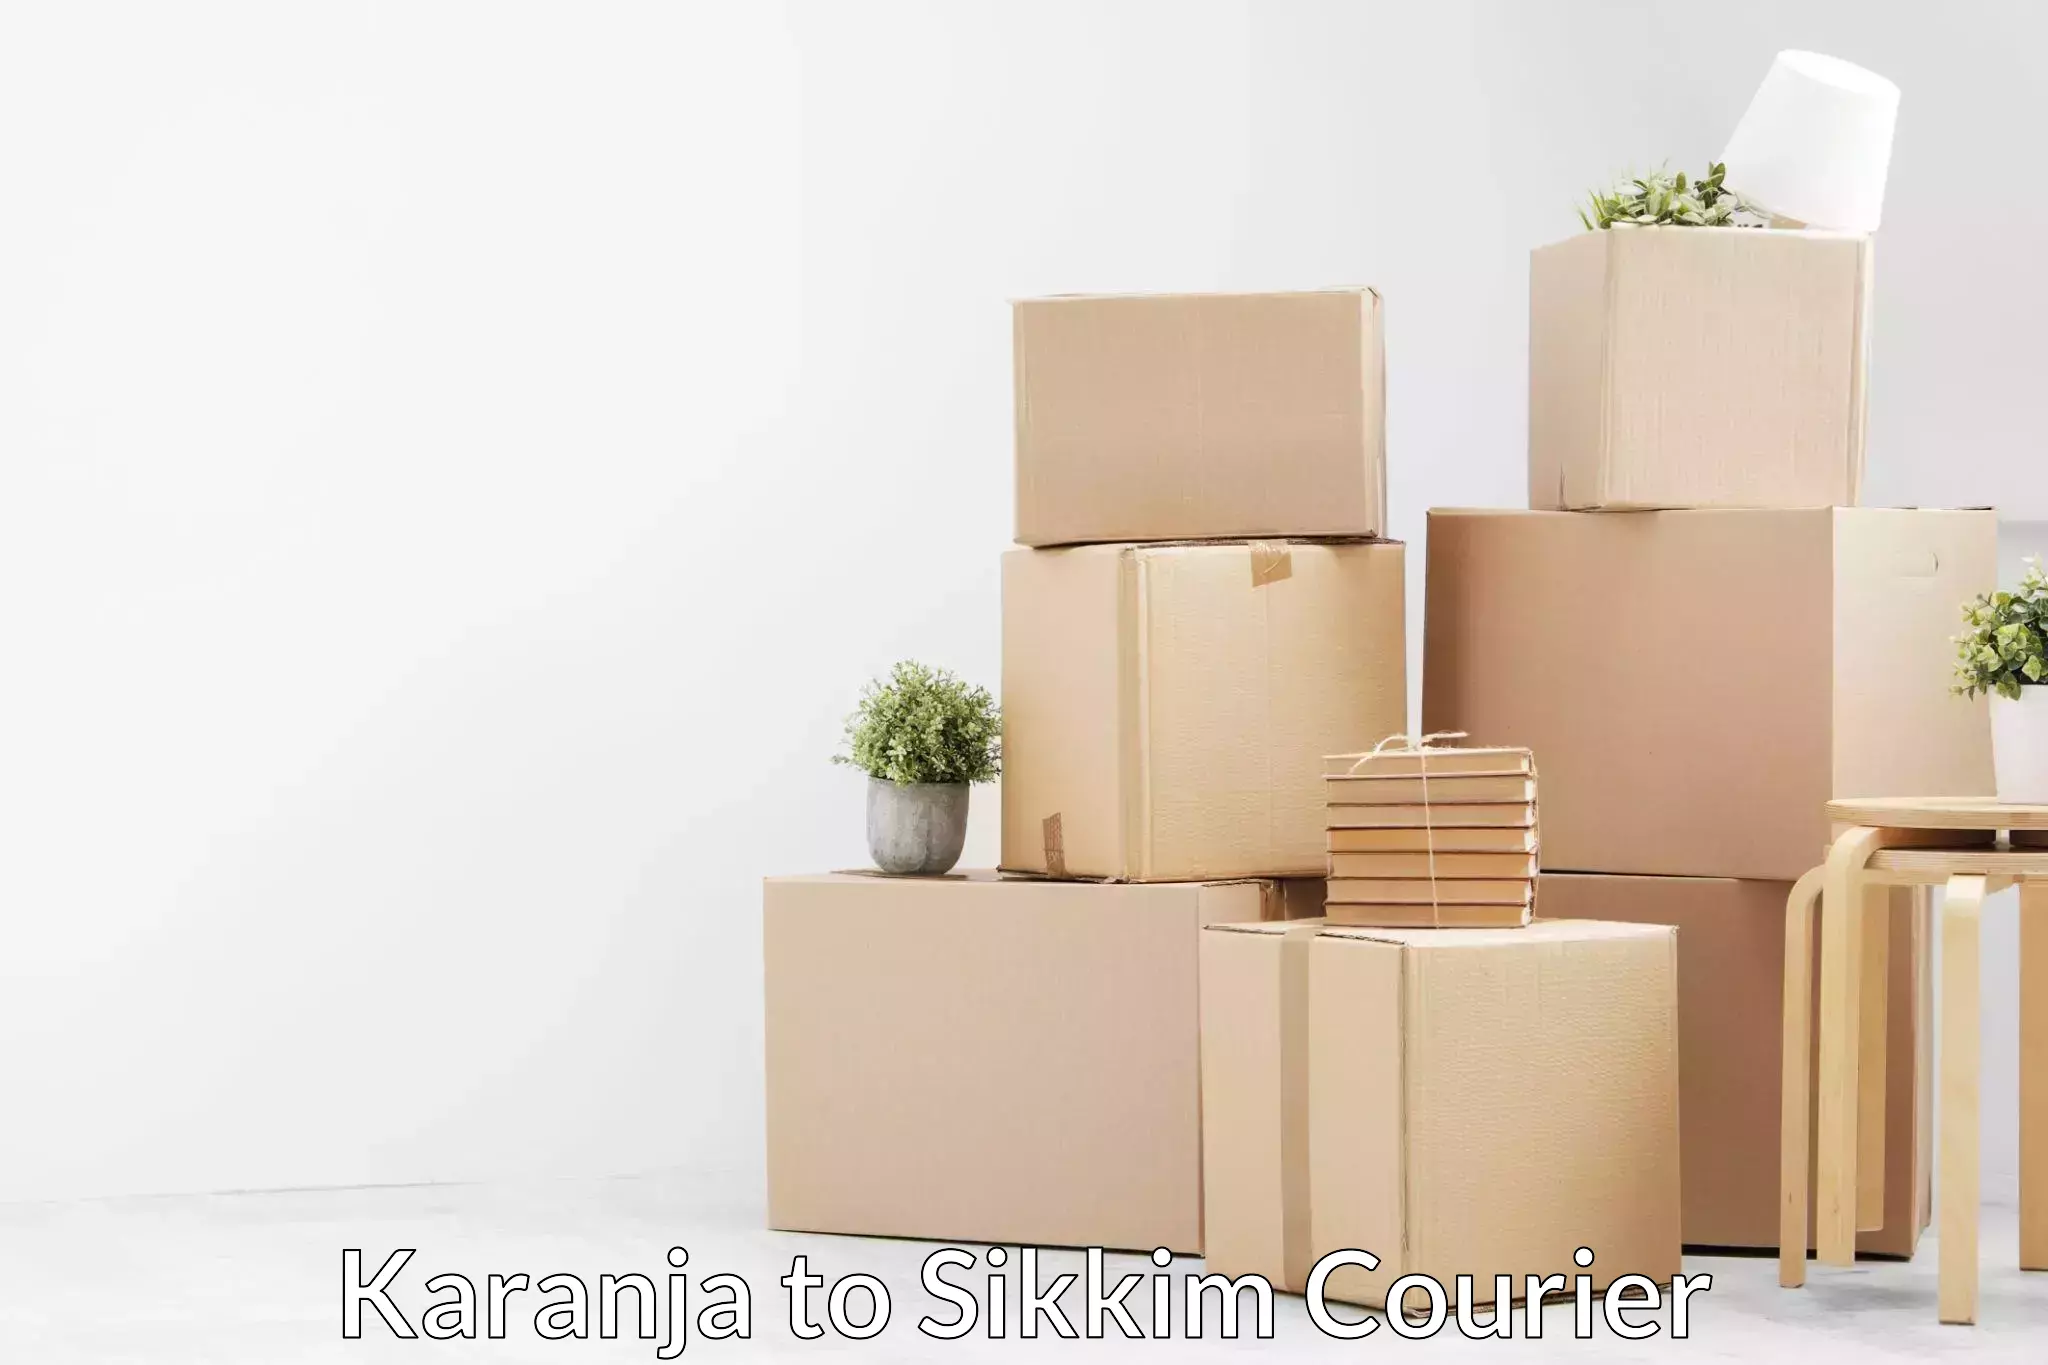 Affordable relocation solutions in Karanja to Sikkim